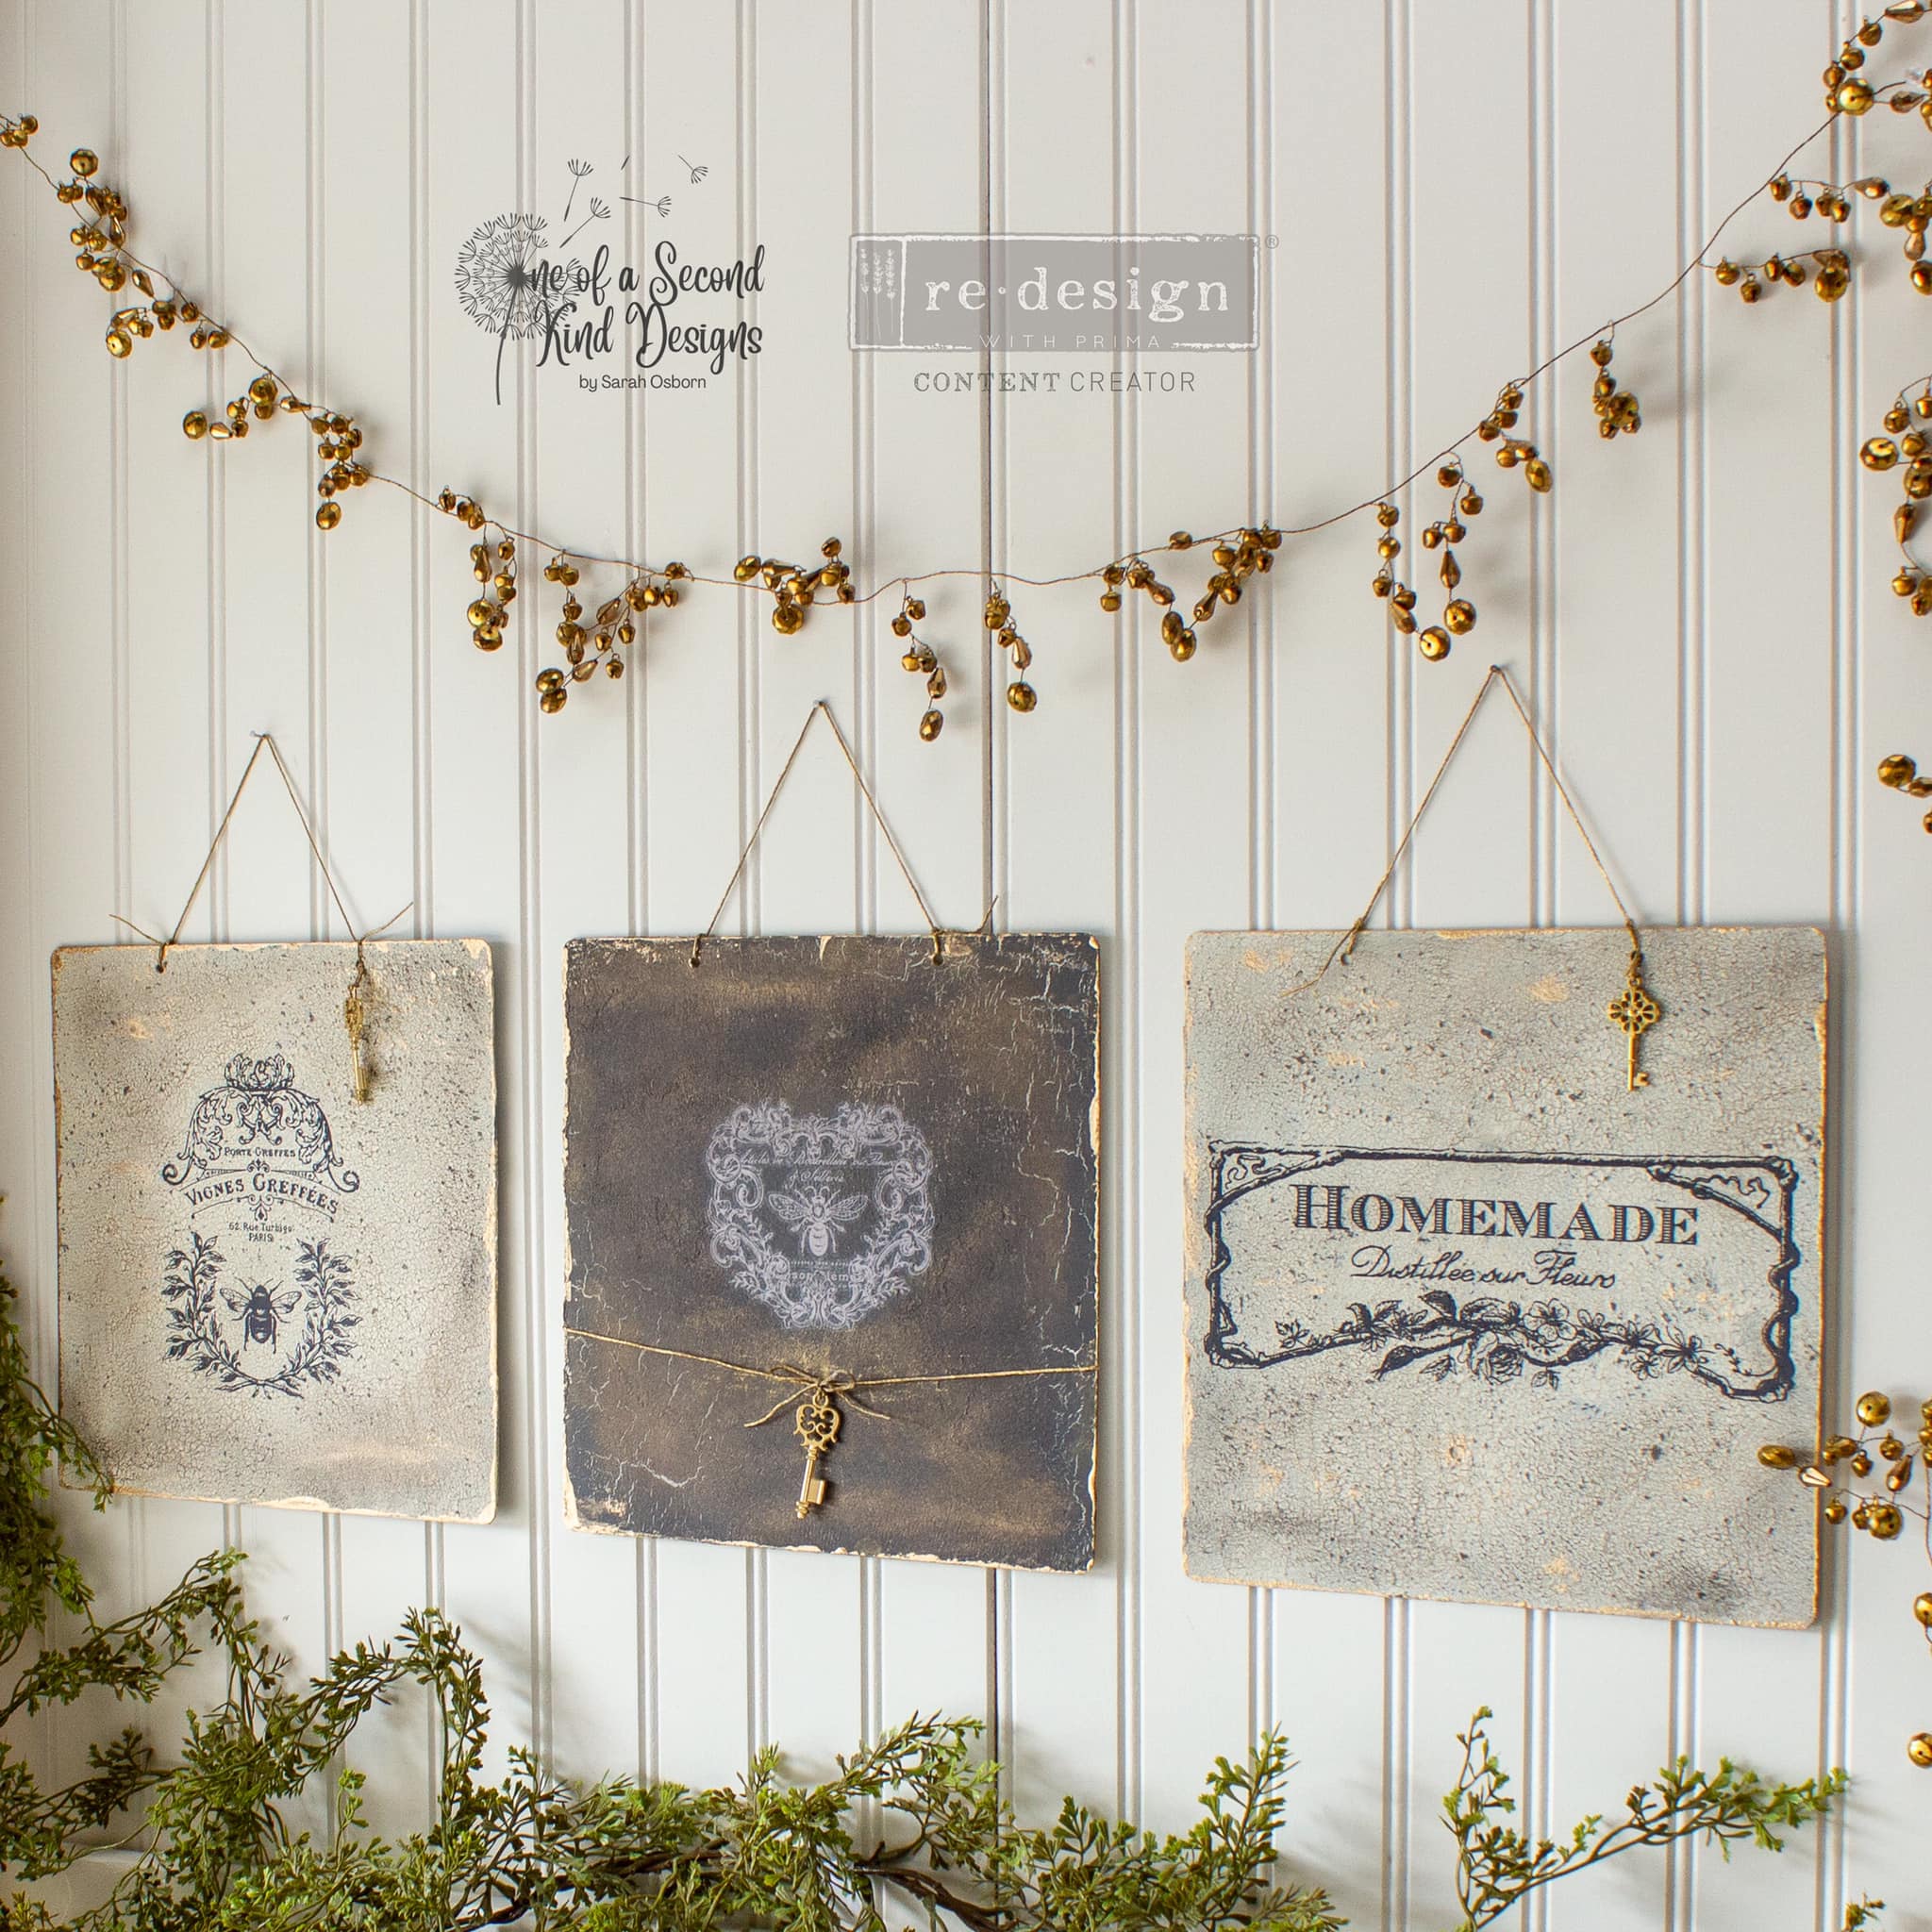 Three decorative hanging metal plates refurbished by One of a Second Kind Designs feature ReDesign with Prima's French Labels small transfer on them.